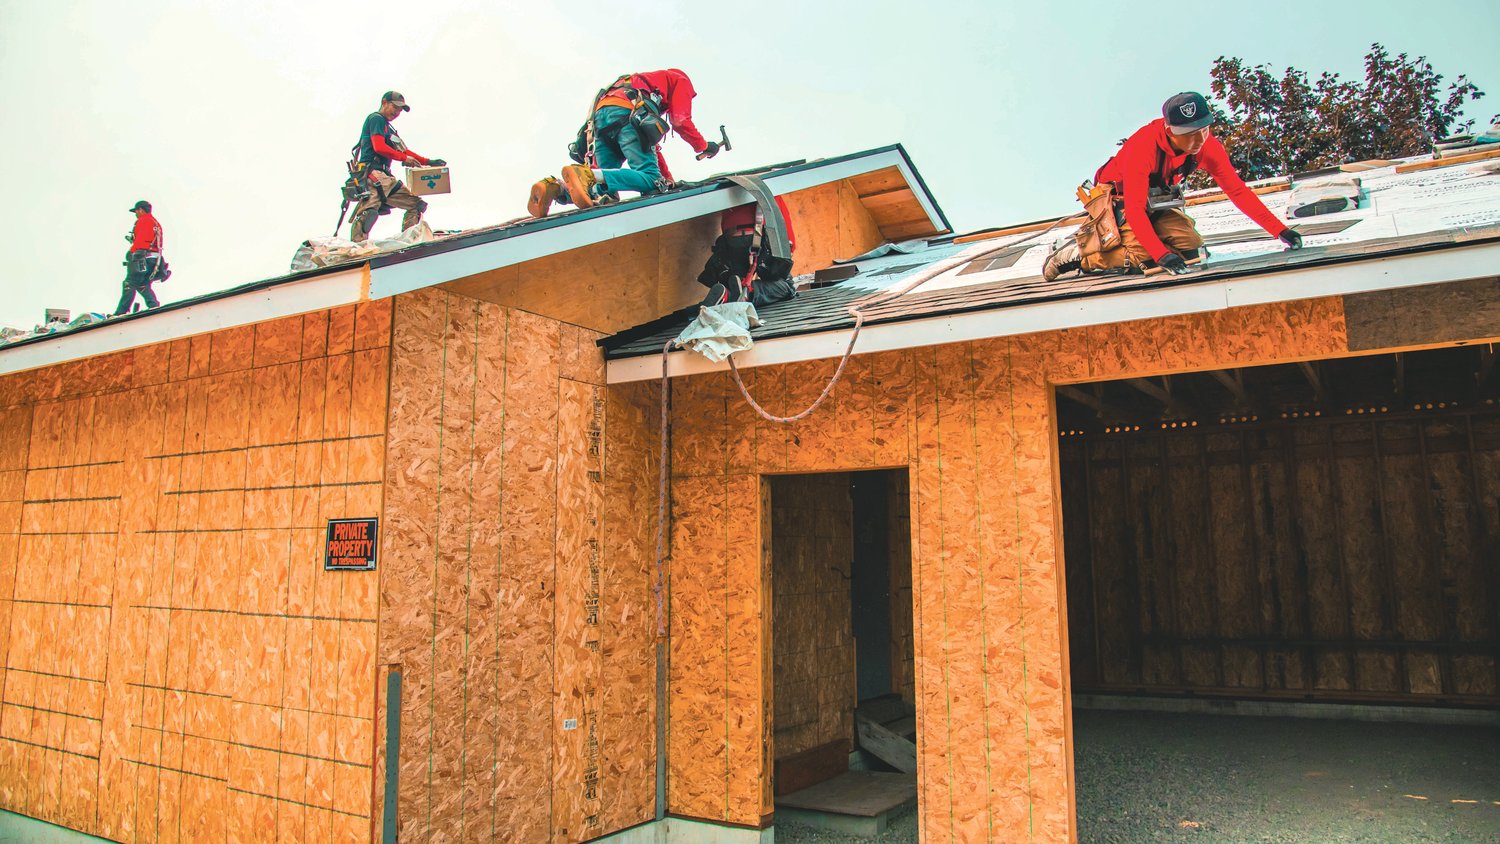 ‘We Really feel It can be Our Duty’: Chehalis Firm Donates Roof for Habitat for Humanity Challenge